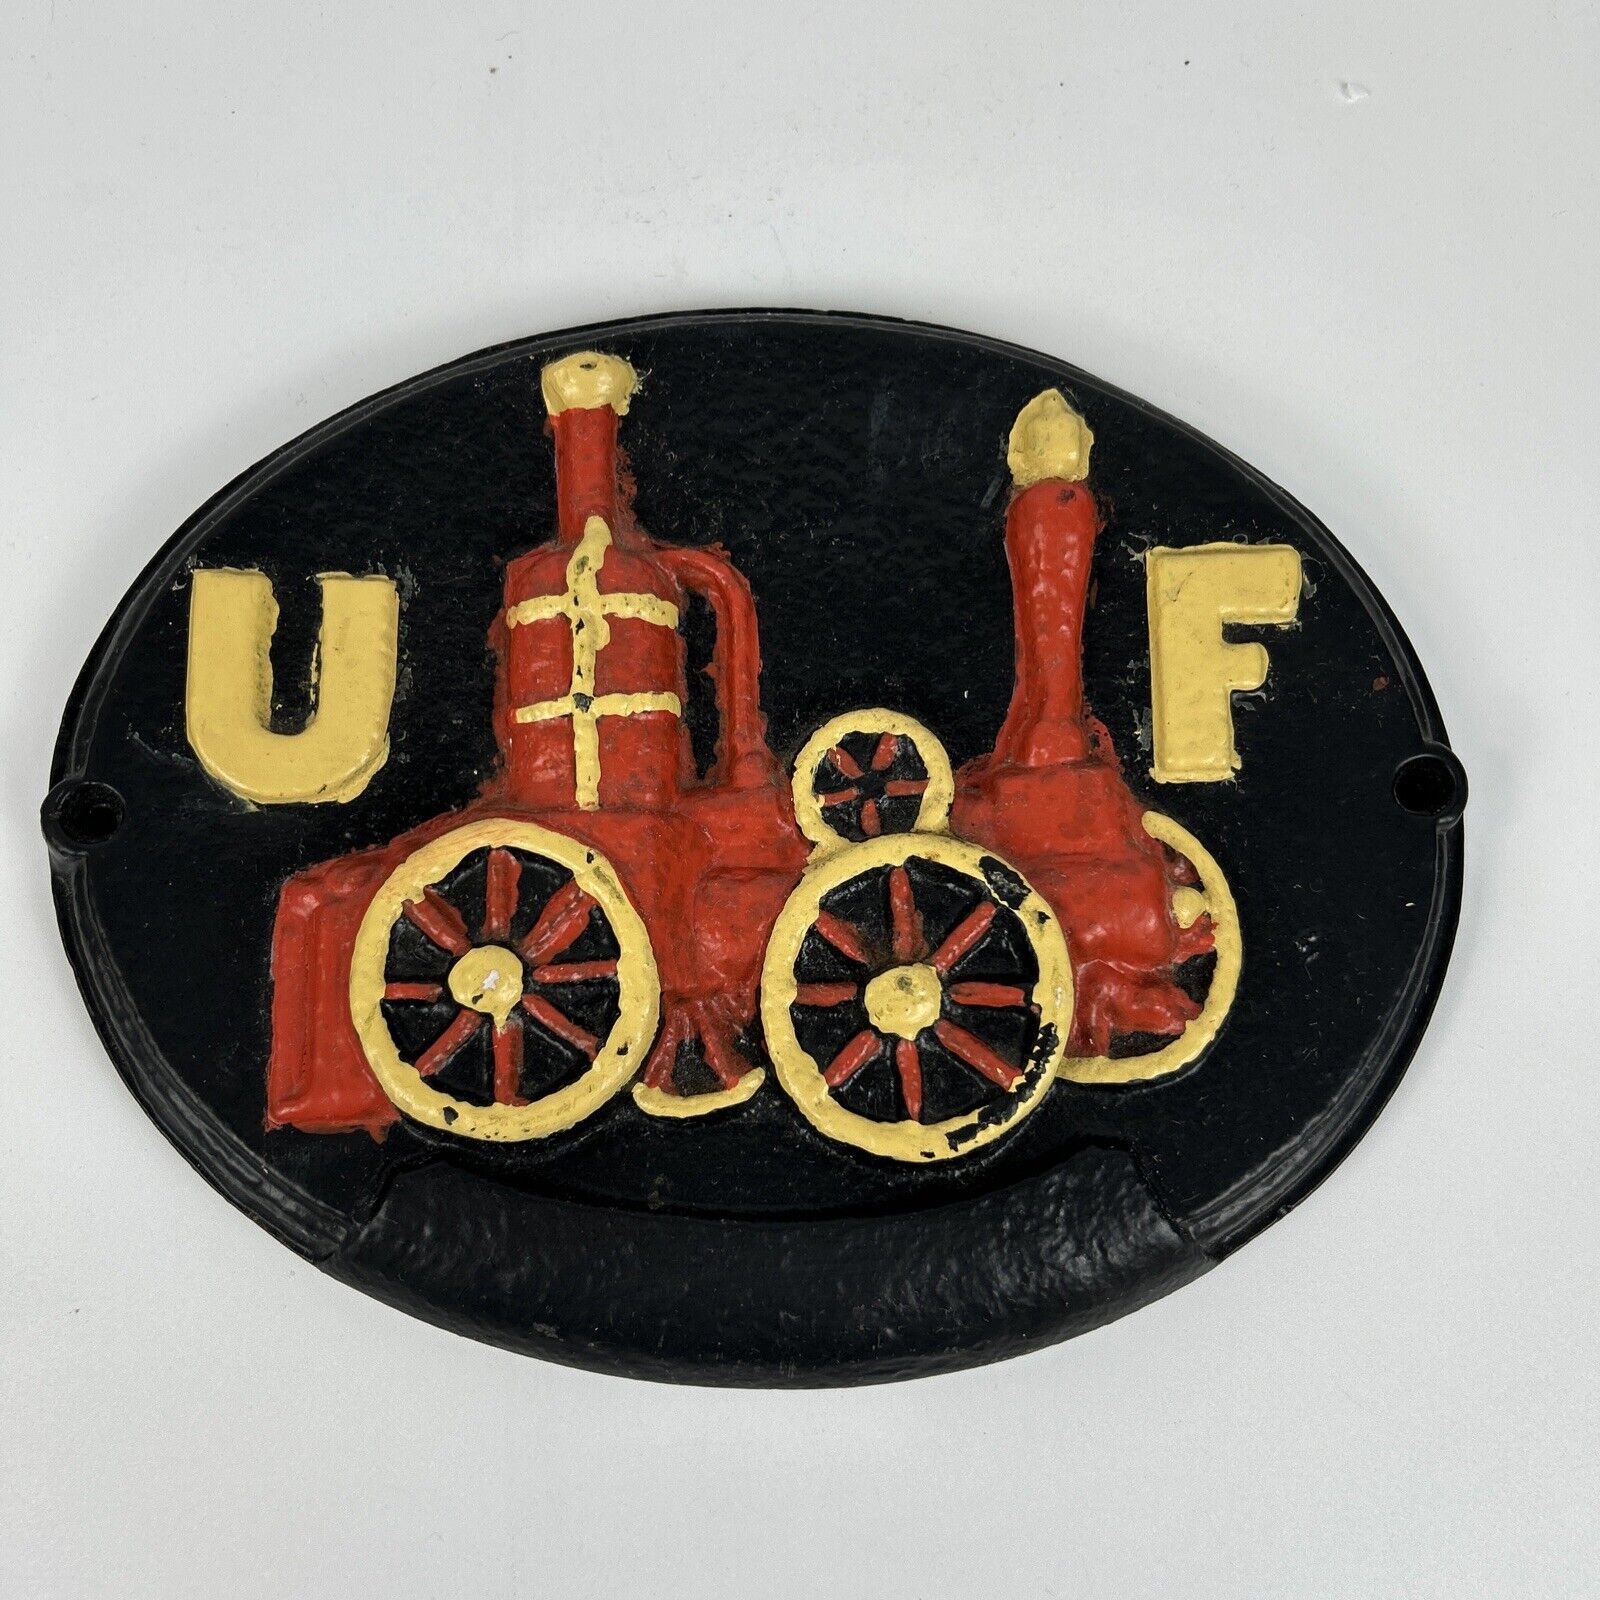 Vintage Oval Cast Iron UF UNITED FIREFIGHTER INSURANCE 3D PLAQUE SIGN 11.25”